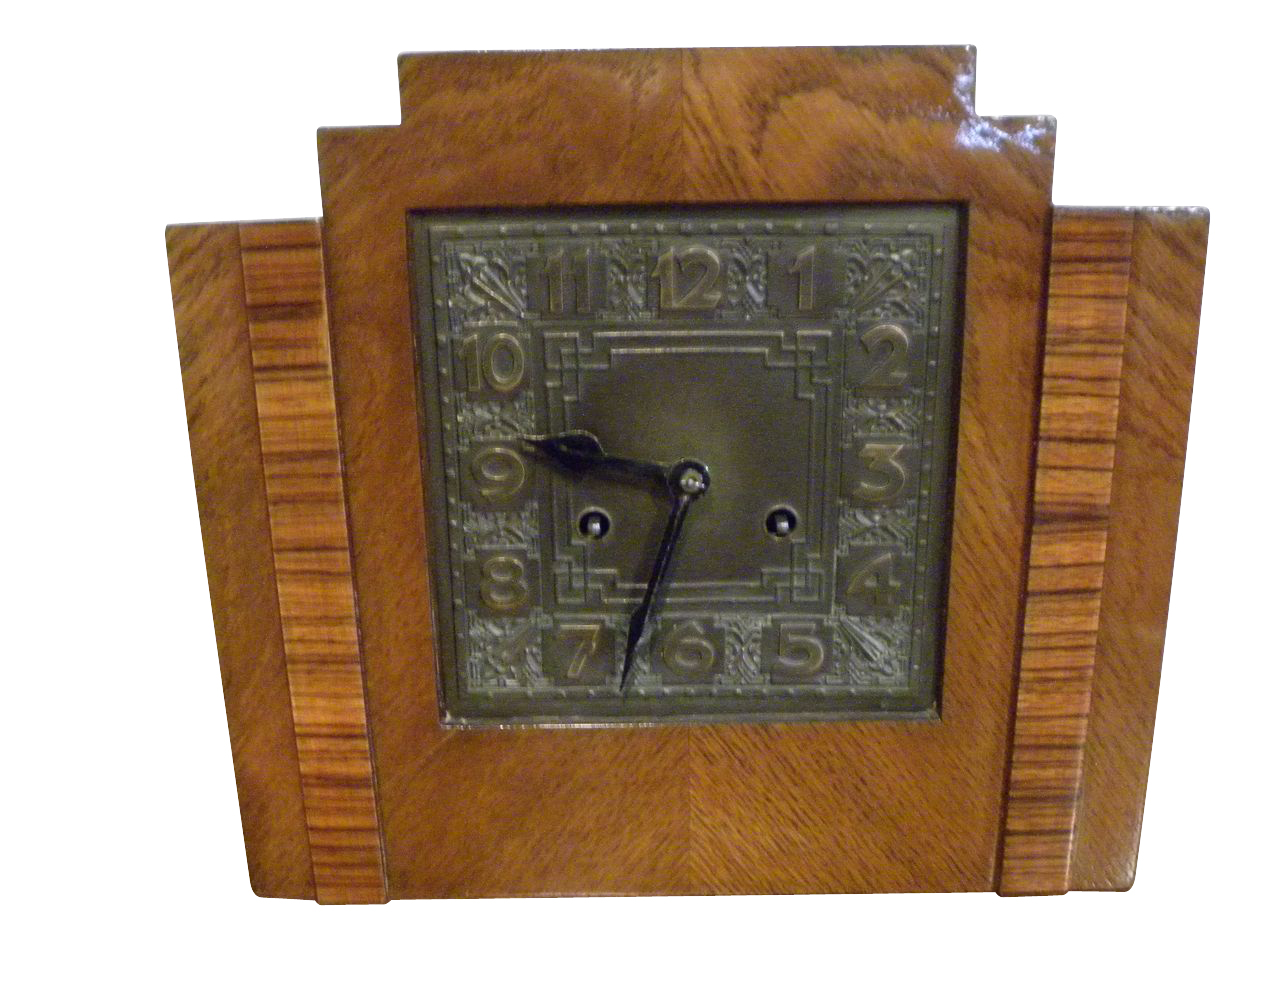 Stair-stepped Wood Mechanical Art Deco Mantle Clock